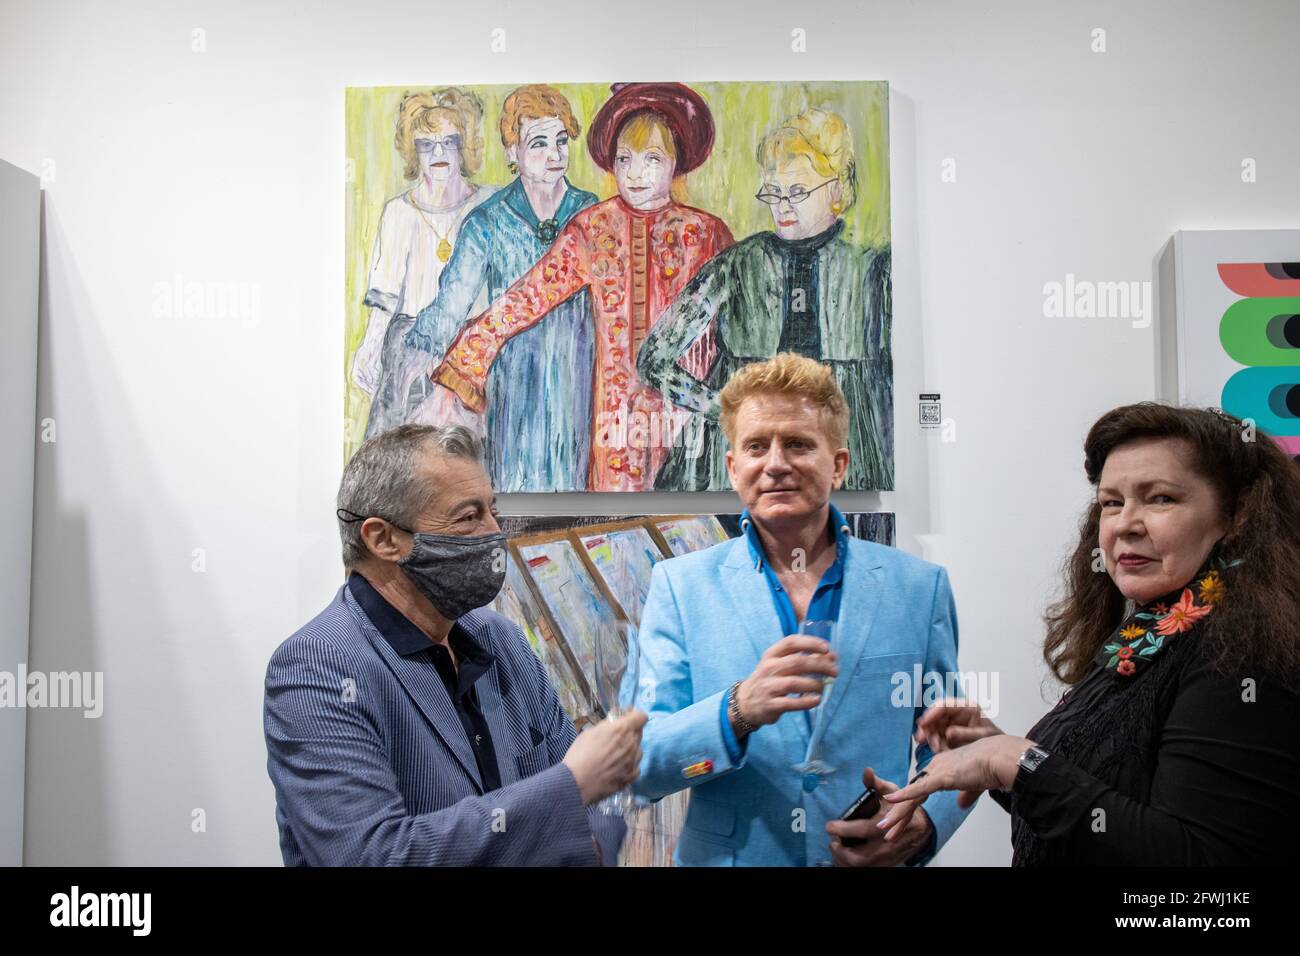 Patrons at Mash art gallery opening of the show Psych-O-Delic. 1st show after 2021 covid 19 restrictions were lifted in Los Angeles. Stock Photo